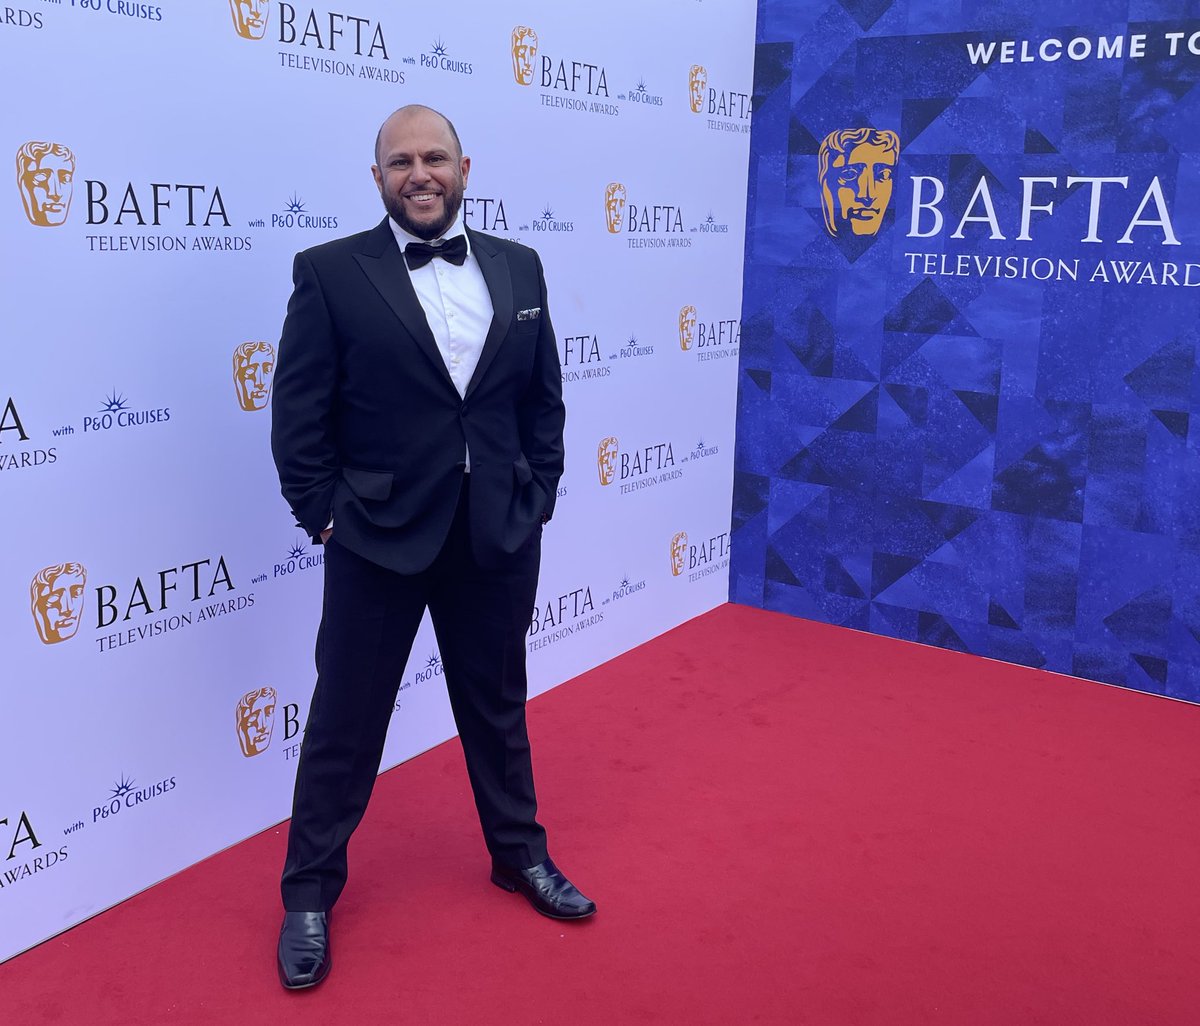 My first @BAFTA TV awards! A huge thank you for having me on the jury this year. Met with some wonderful industry folk and @antanddec to reminisce about our days on #BykerGrove. Best of luck to all the nominees tonight. It’s going to be tough!